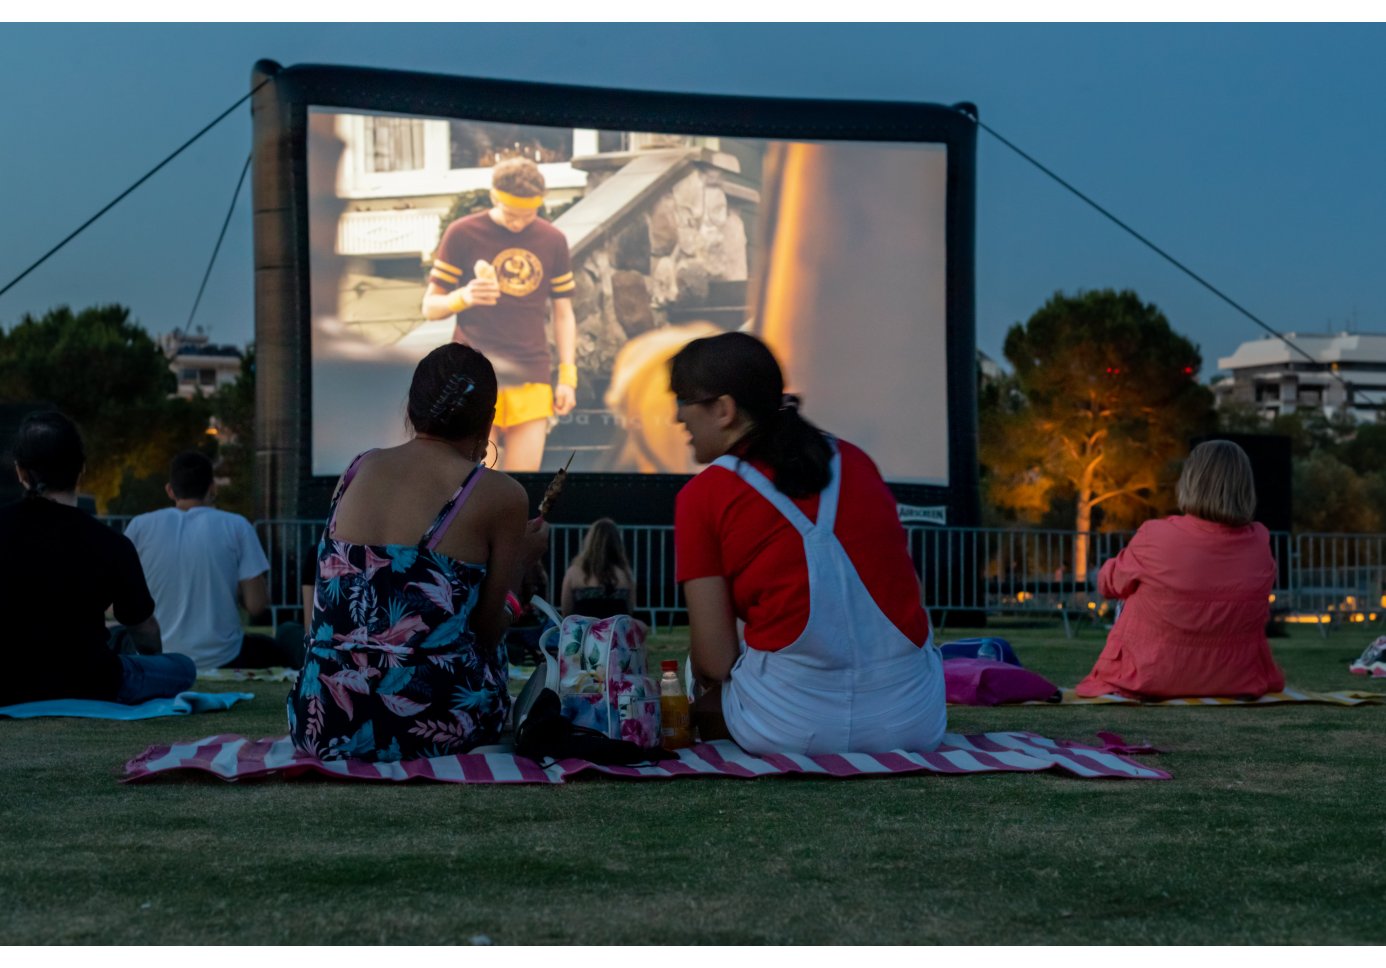 people sitting on the grass in a park, a film playing on a big screen